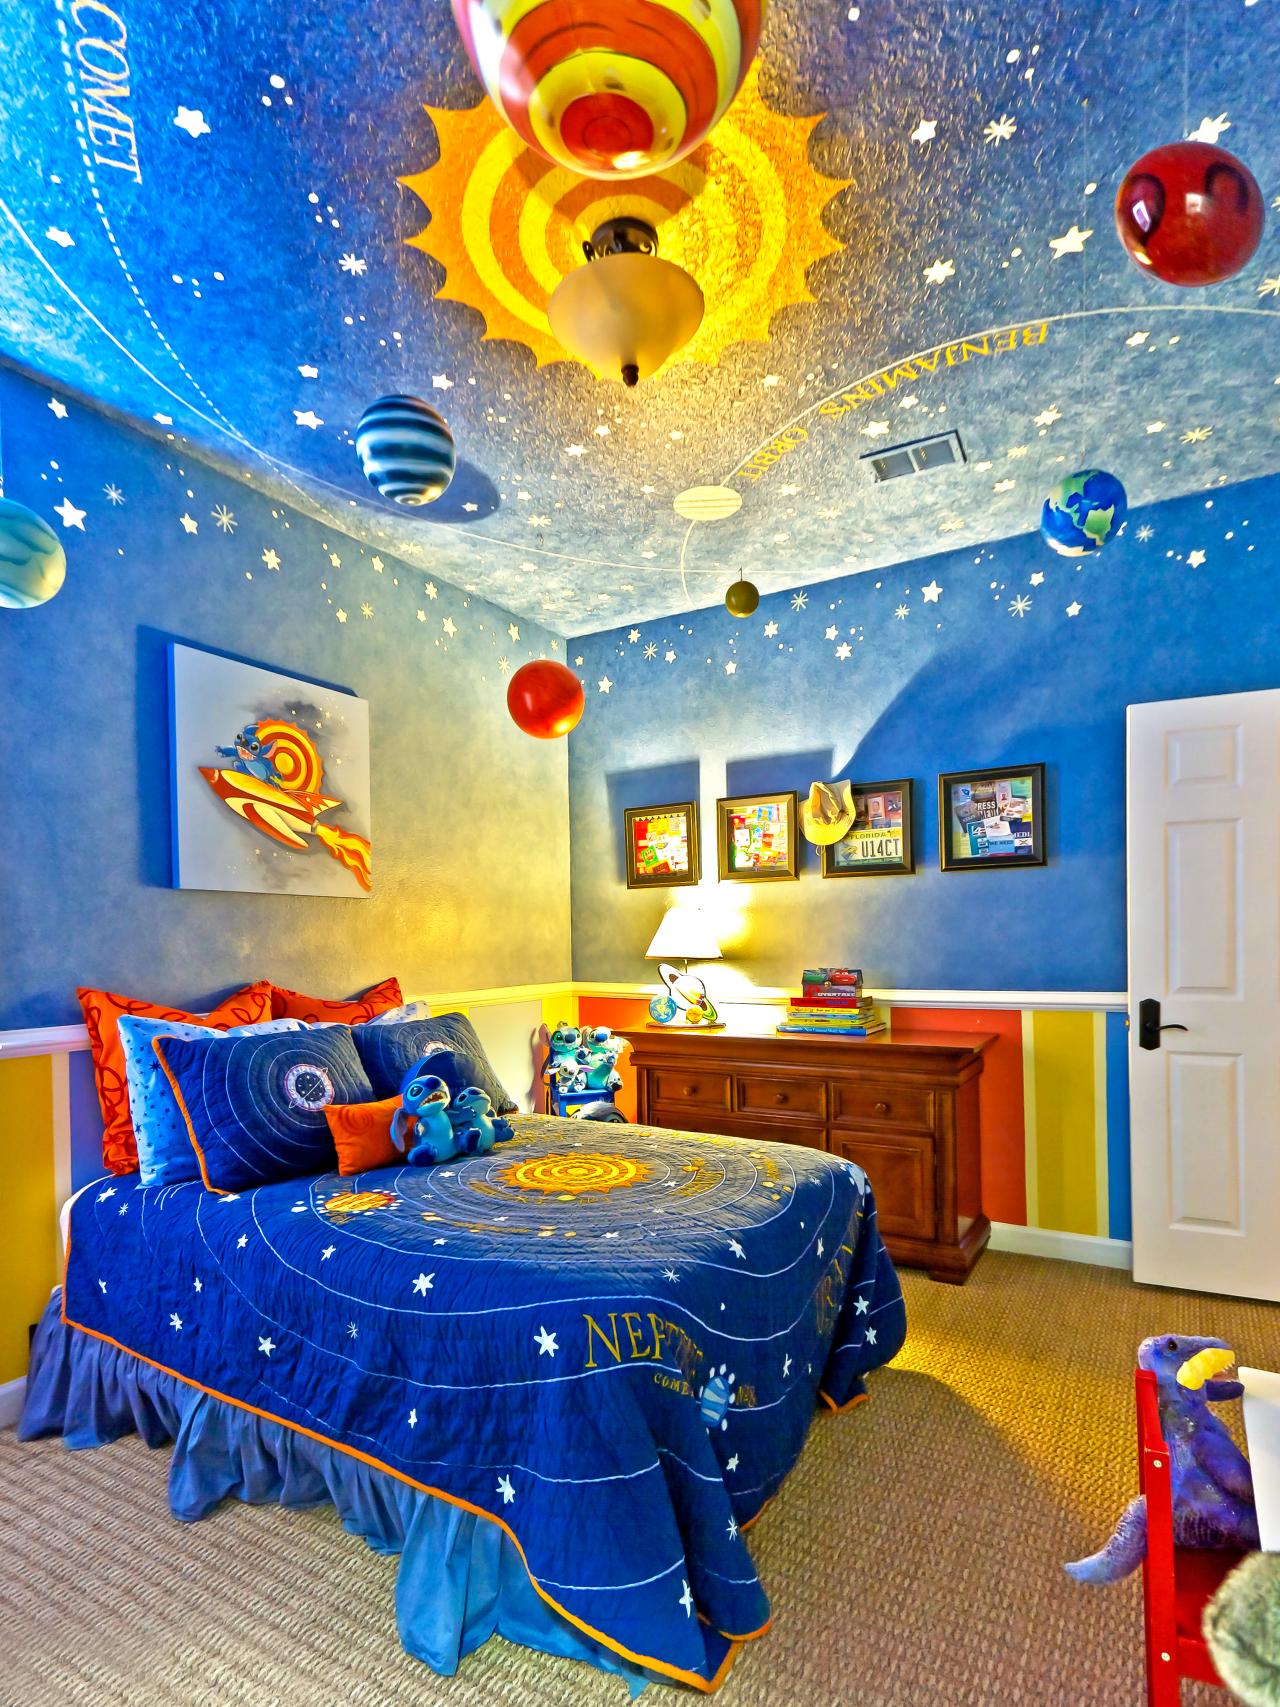 Kids' Rooms Inspired by the Pan Movie   HGTV's Decorating & Design ...